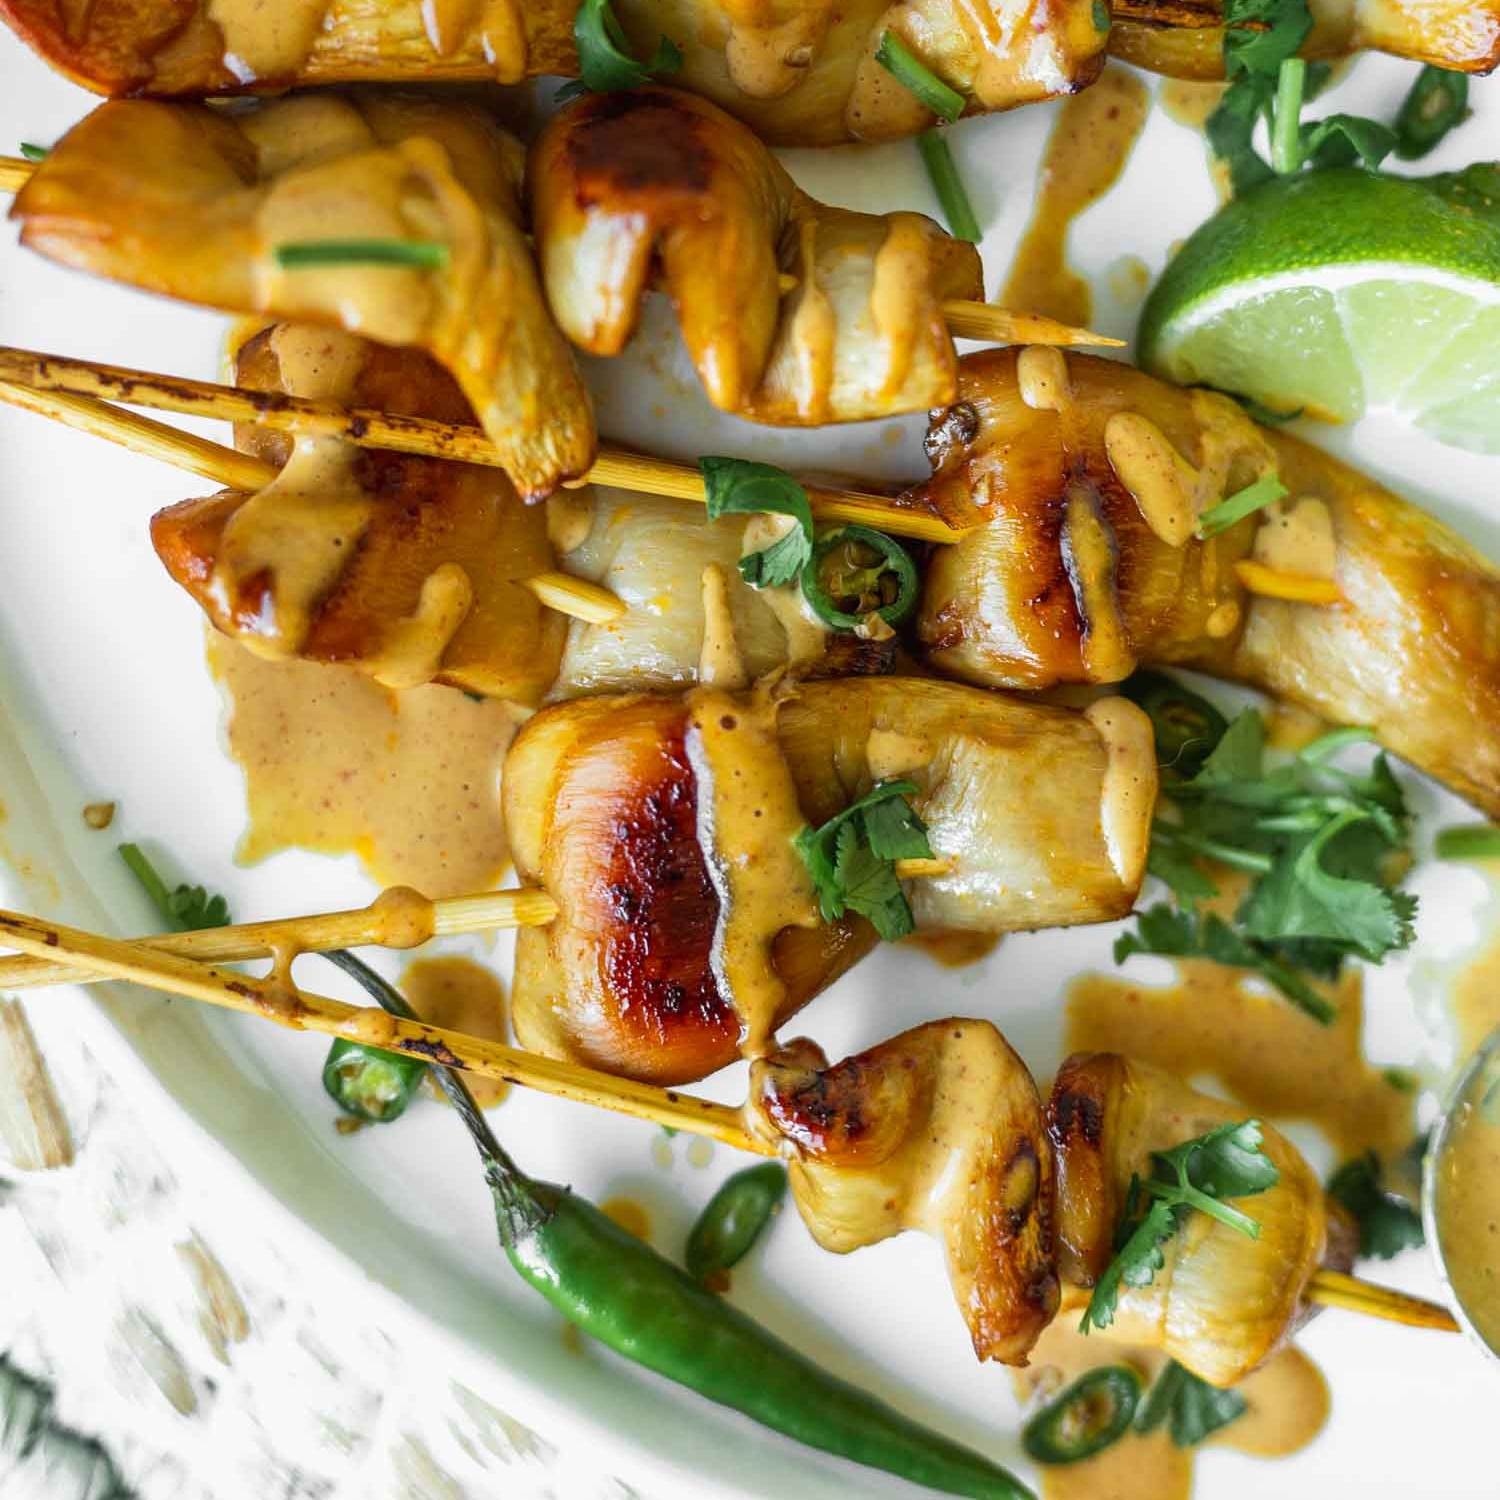 Vegan King Satay with Spicy Peanut-Ginger Sauce Recipe from The Wicked Healthy Cookbook. Photo by Kari of Beautiful Ingredient.